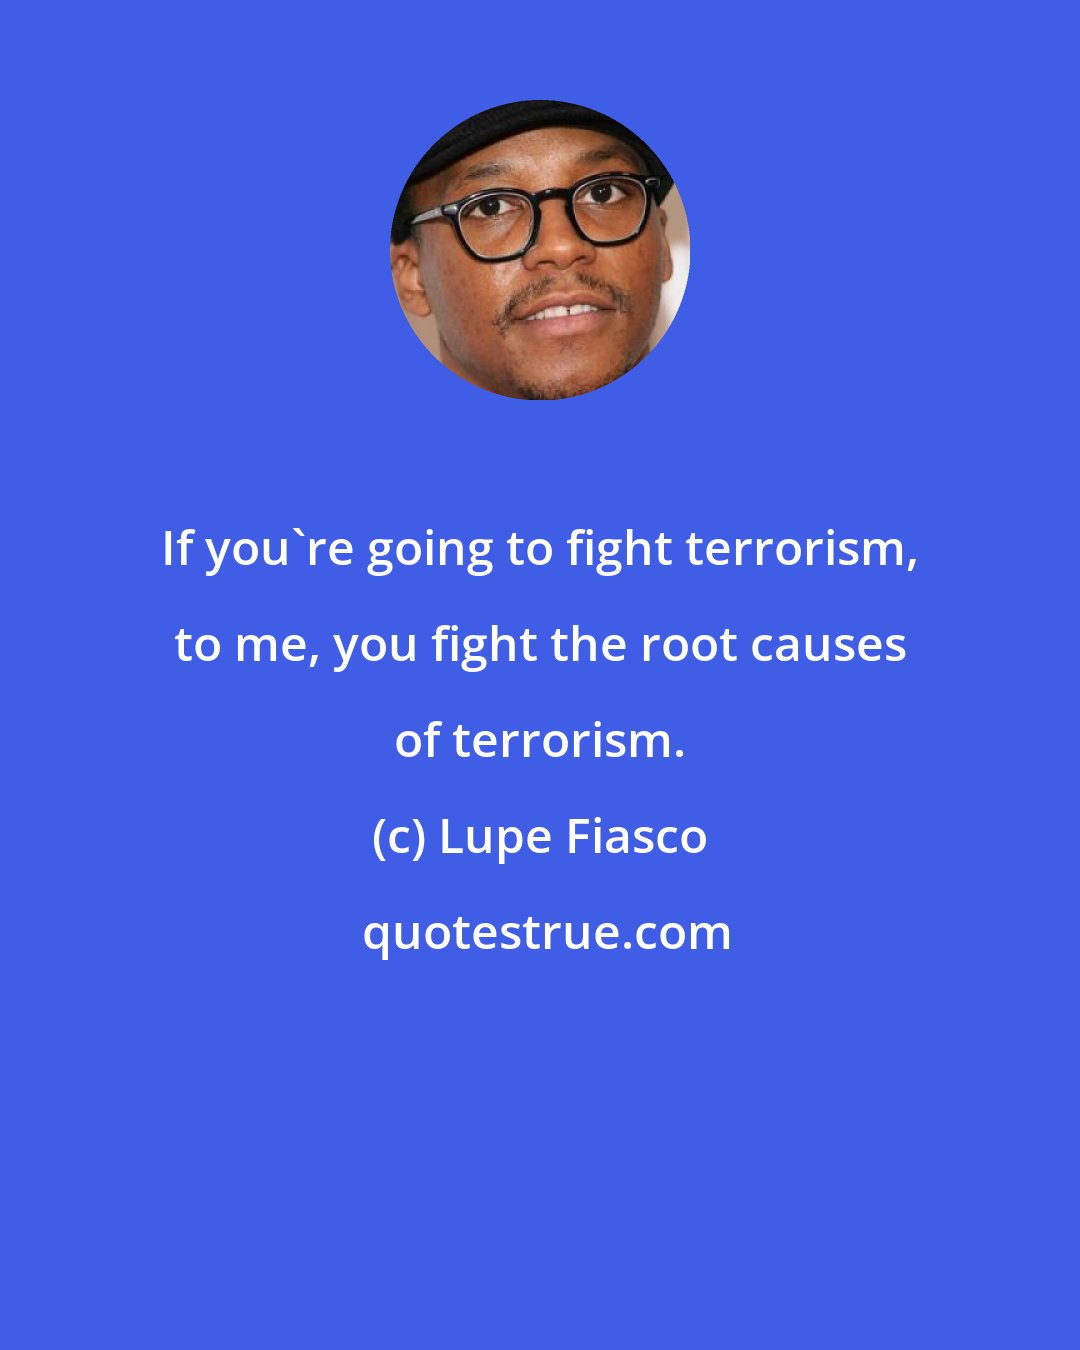 Lupe Fiasco: If you're going to fight terrorism, to me, you fight the root causes of terrorism.